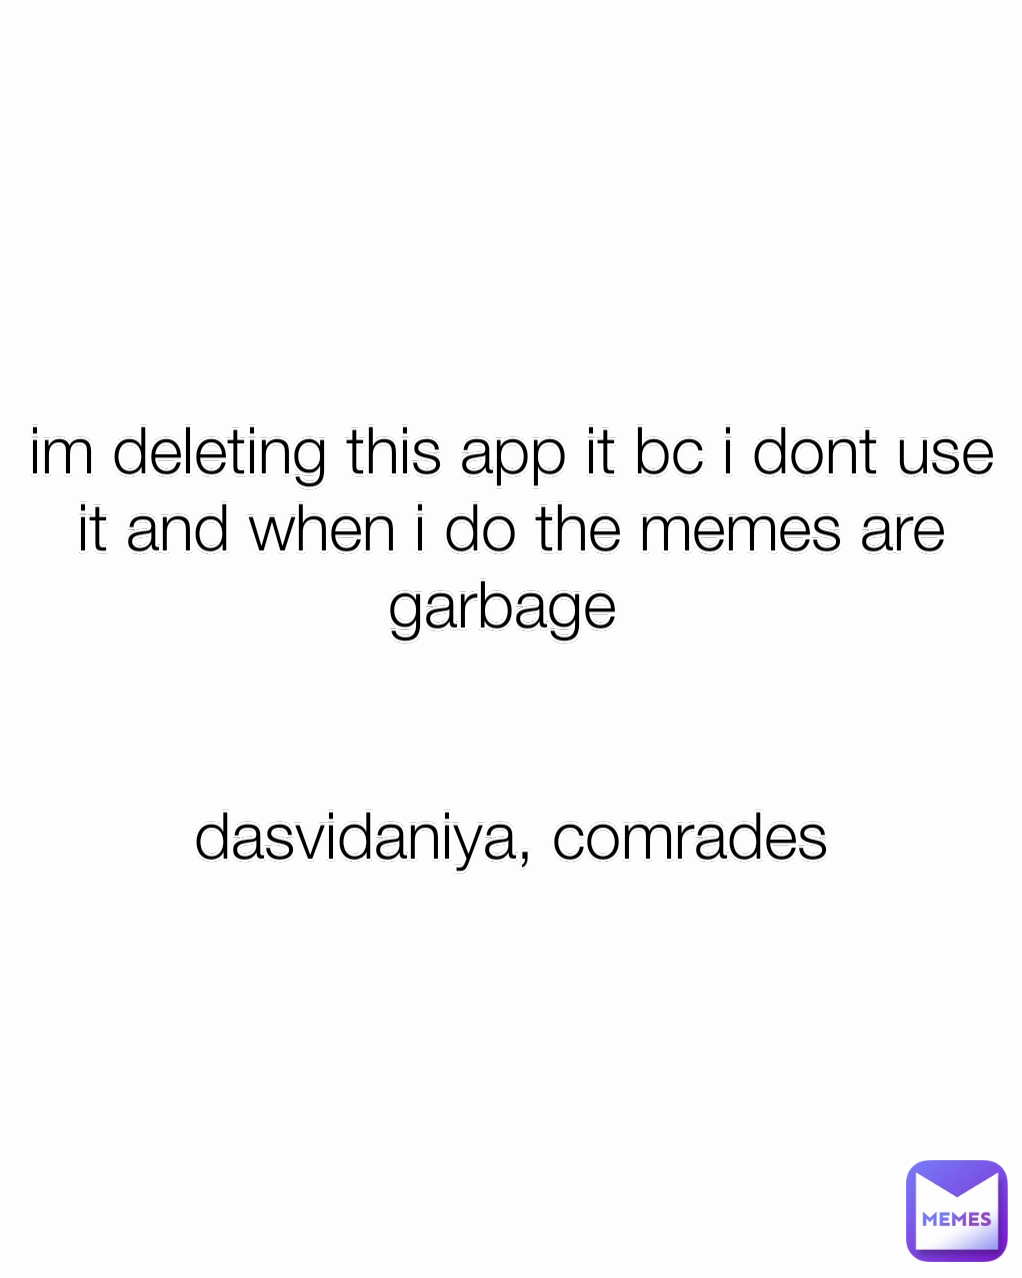 im deleting this app it bc i dont use it and when i do the memes are garbage 


dasvidaniya, comrades